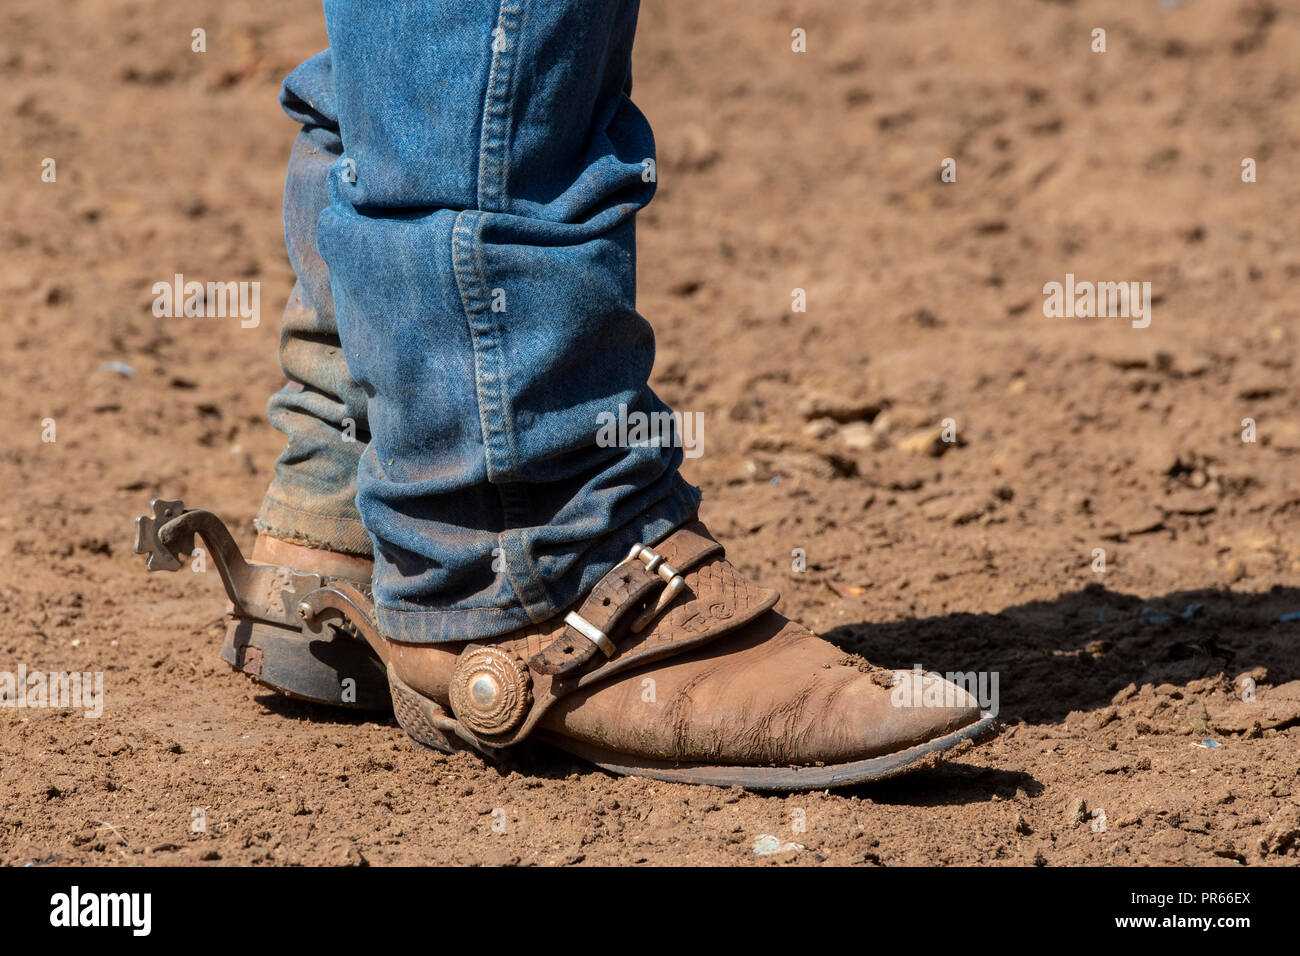 Fashionable leather shoes, leather belt and jeans. cowboy style Stock Photo  by ©Devin_Pavel 42429727